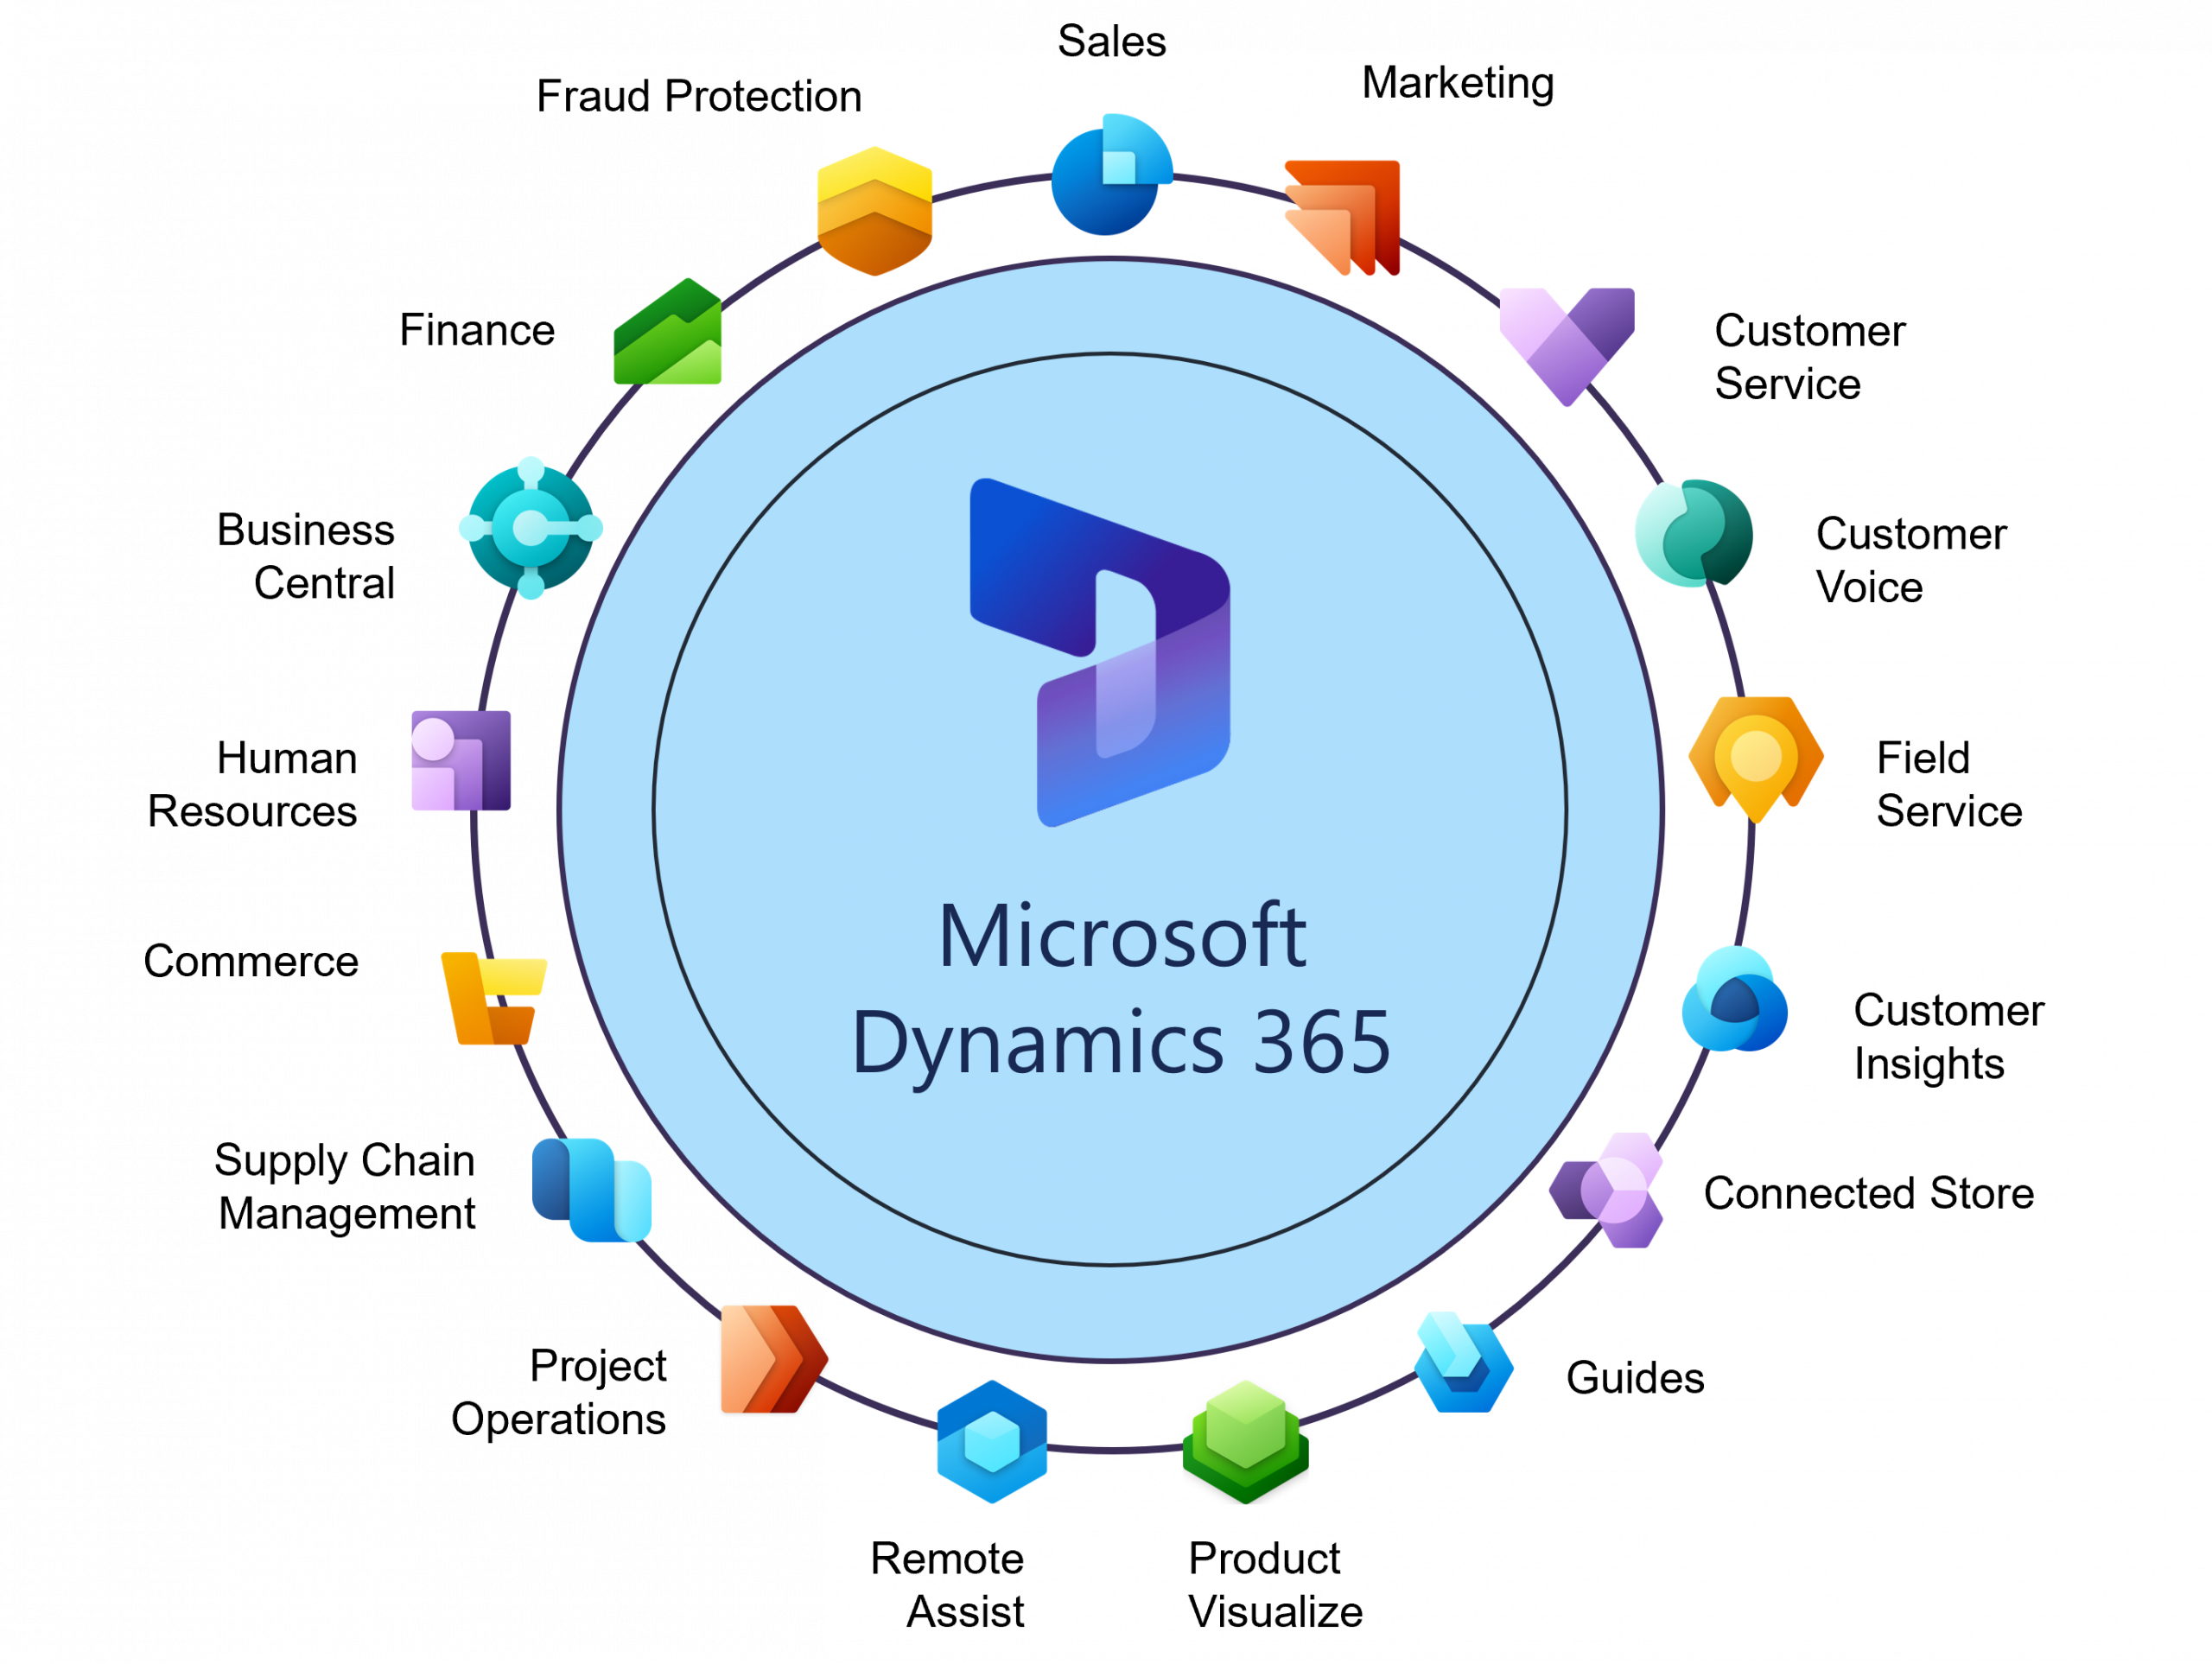 Microsoft Dynamics 365: Optimize your business processes and enhance customer relationships with this powerful CRM and ERP solution.
Microsoft Exchange Server: Manage your emails, calendars, and contacts efficiently with this reliable and secure email server solution.